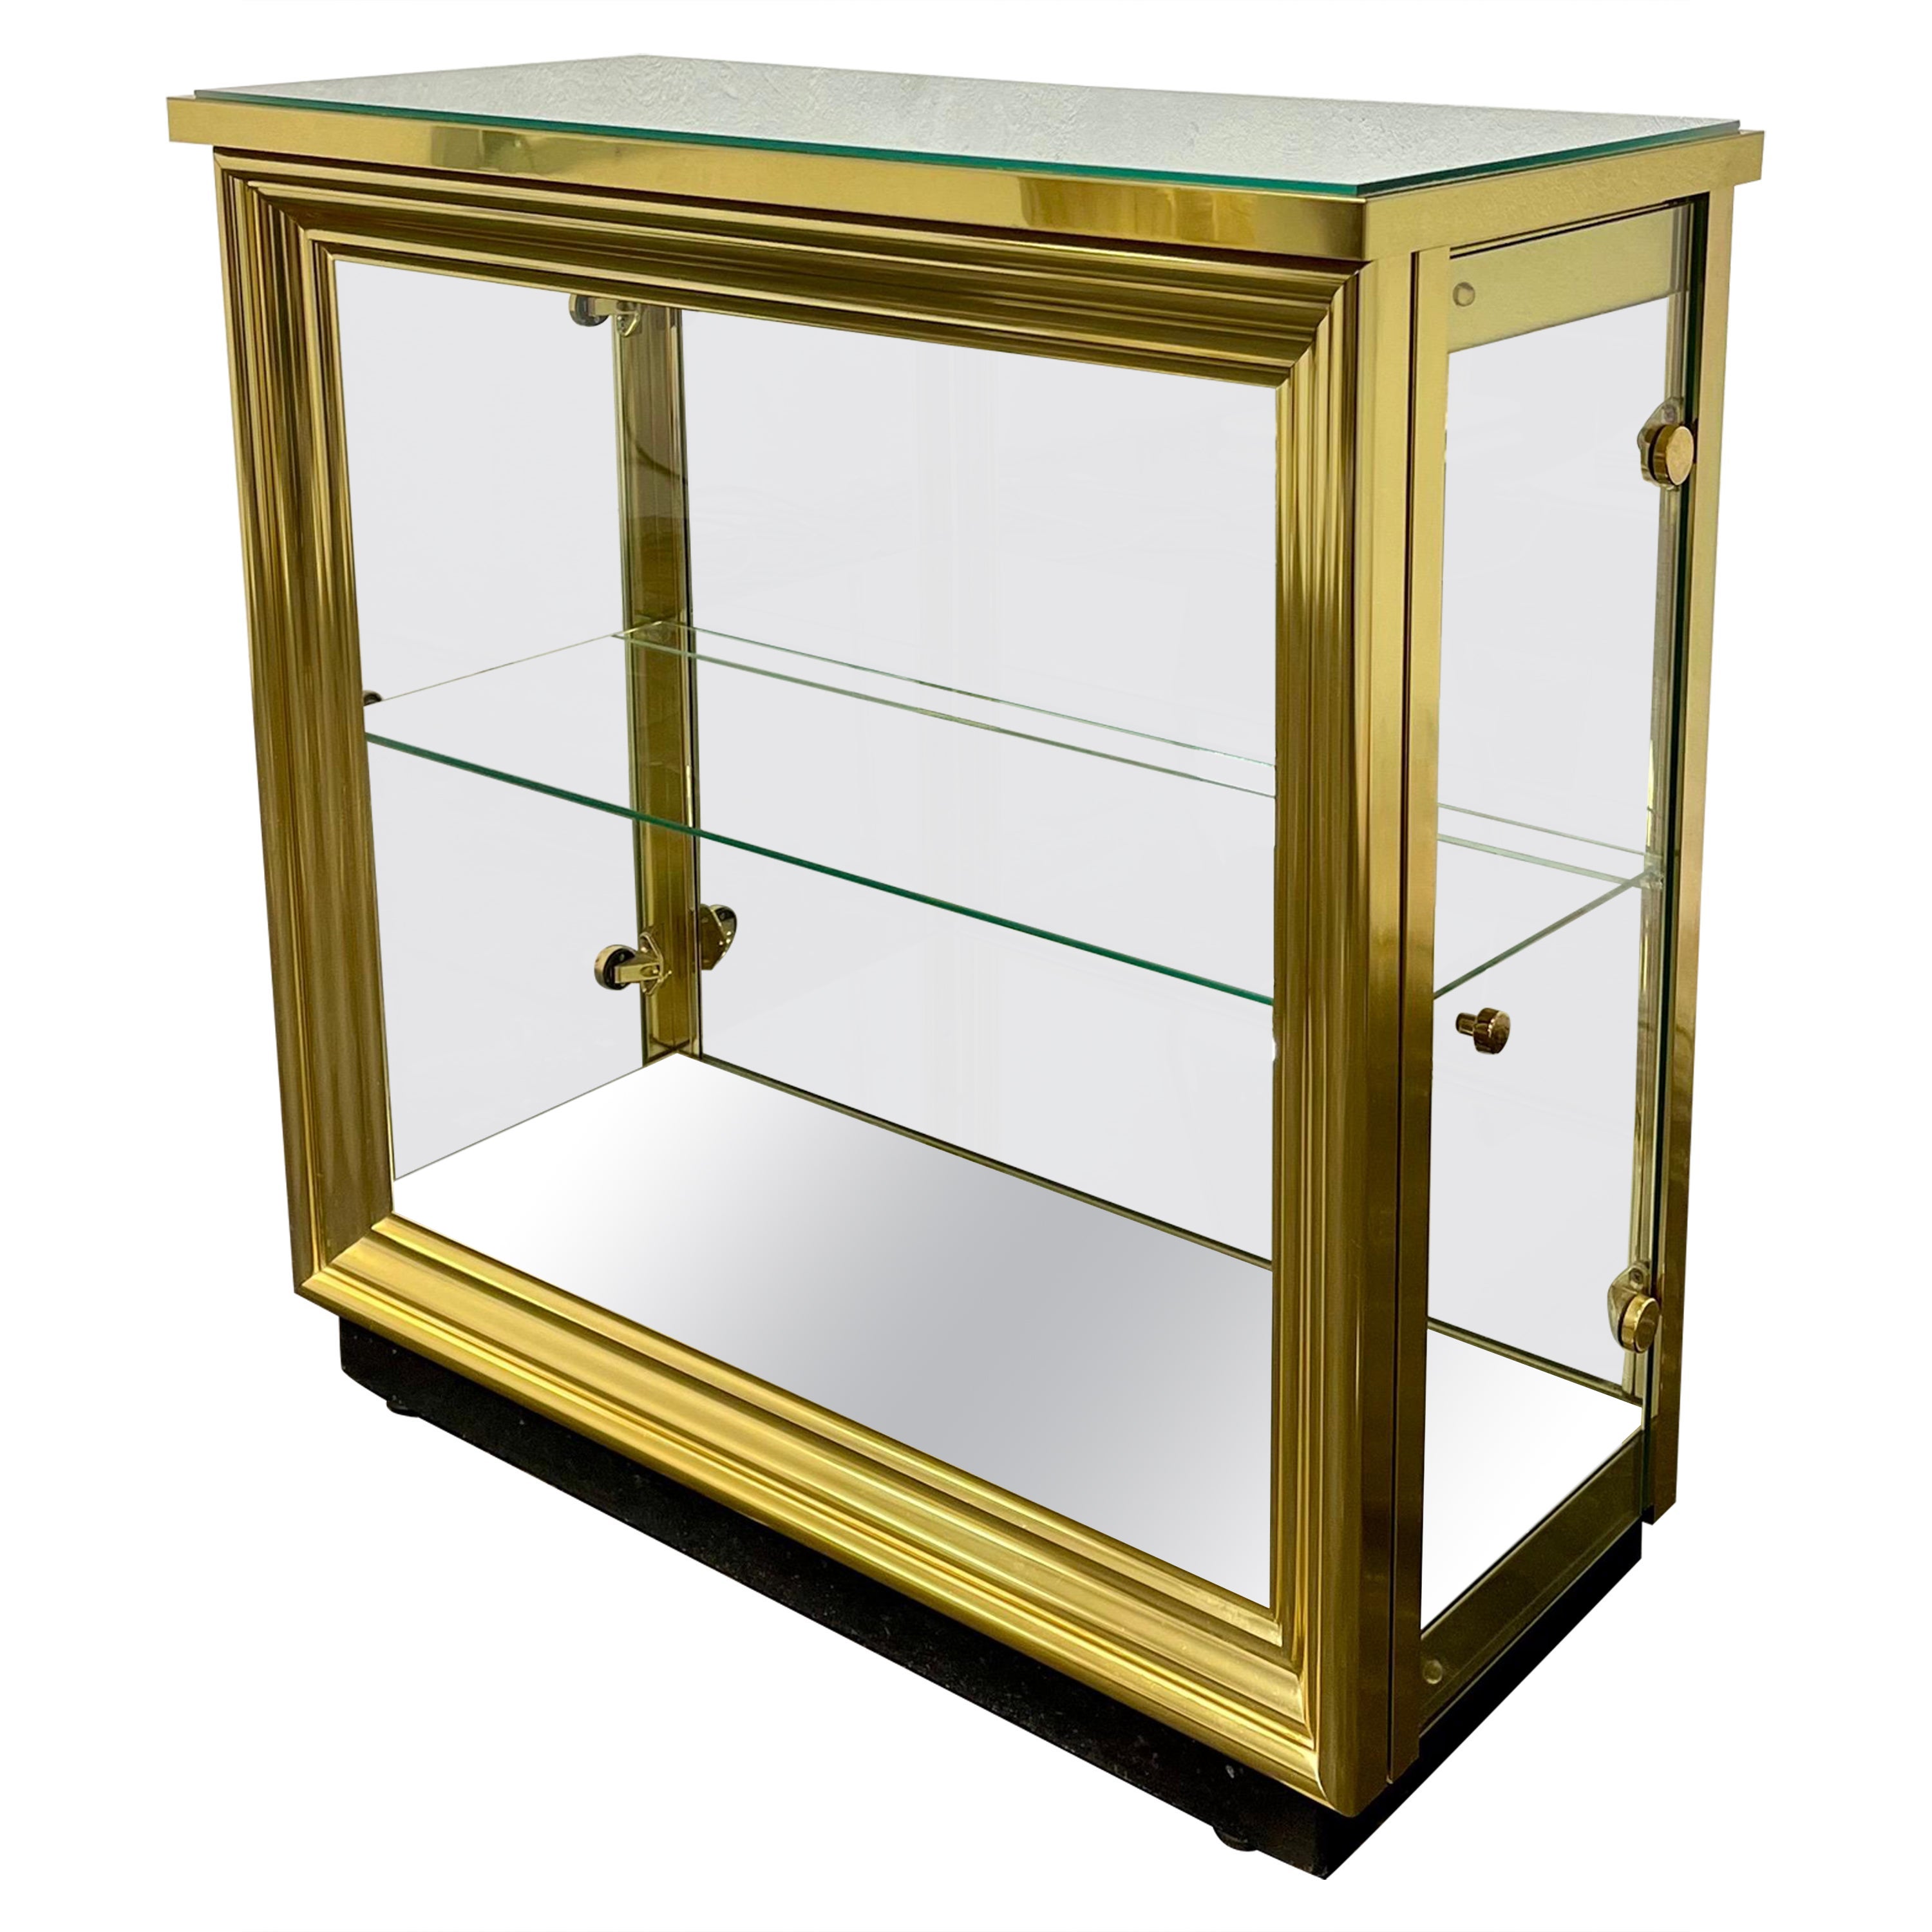 Hollywood Regency Brass & Glass Display or Curio Cabinet After Mastercraft